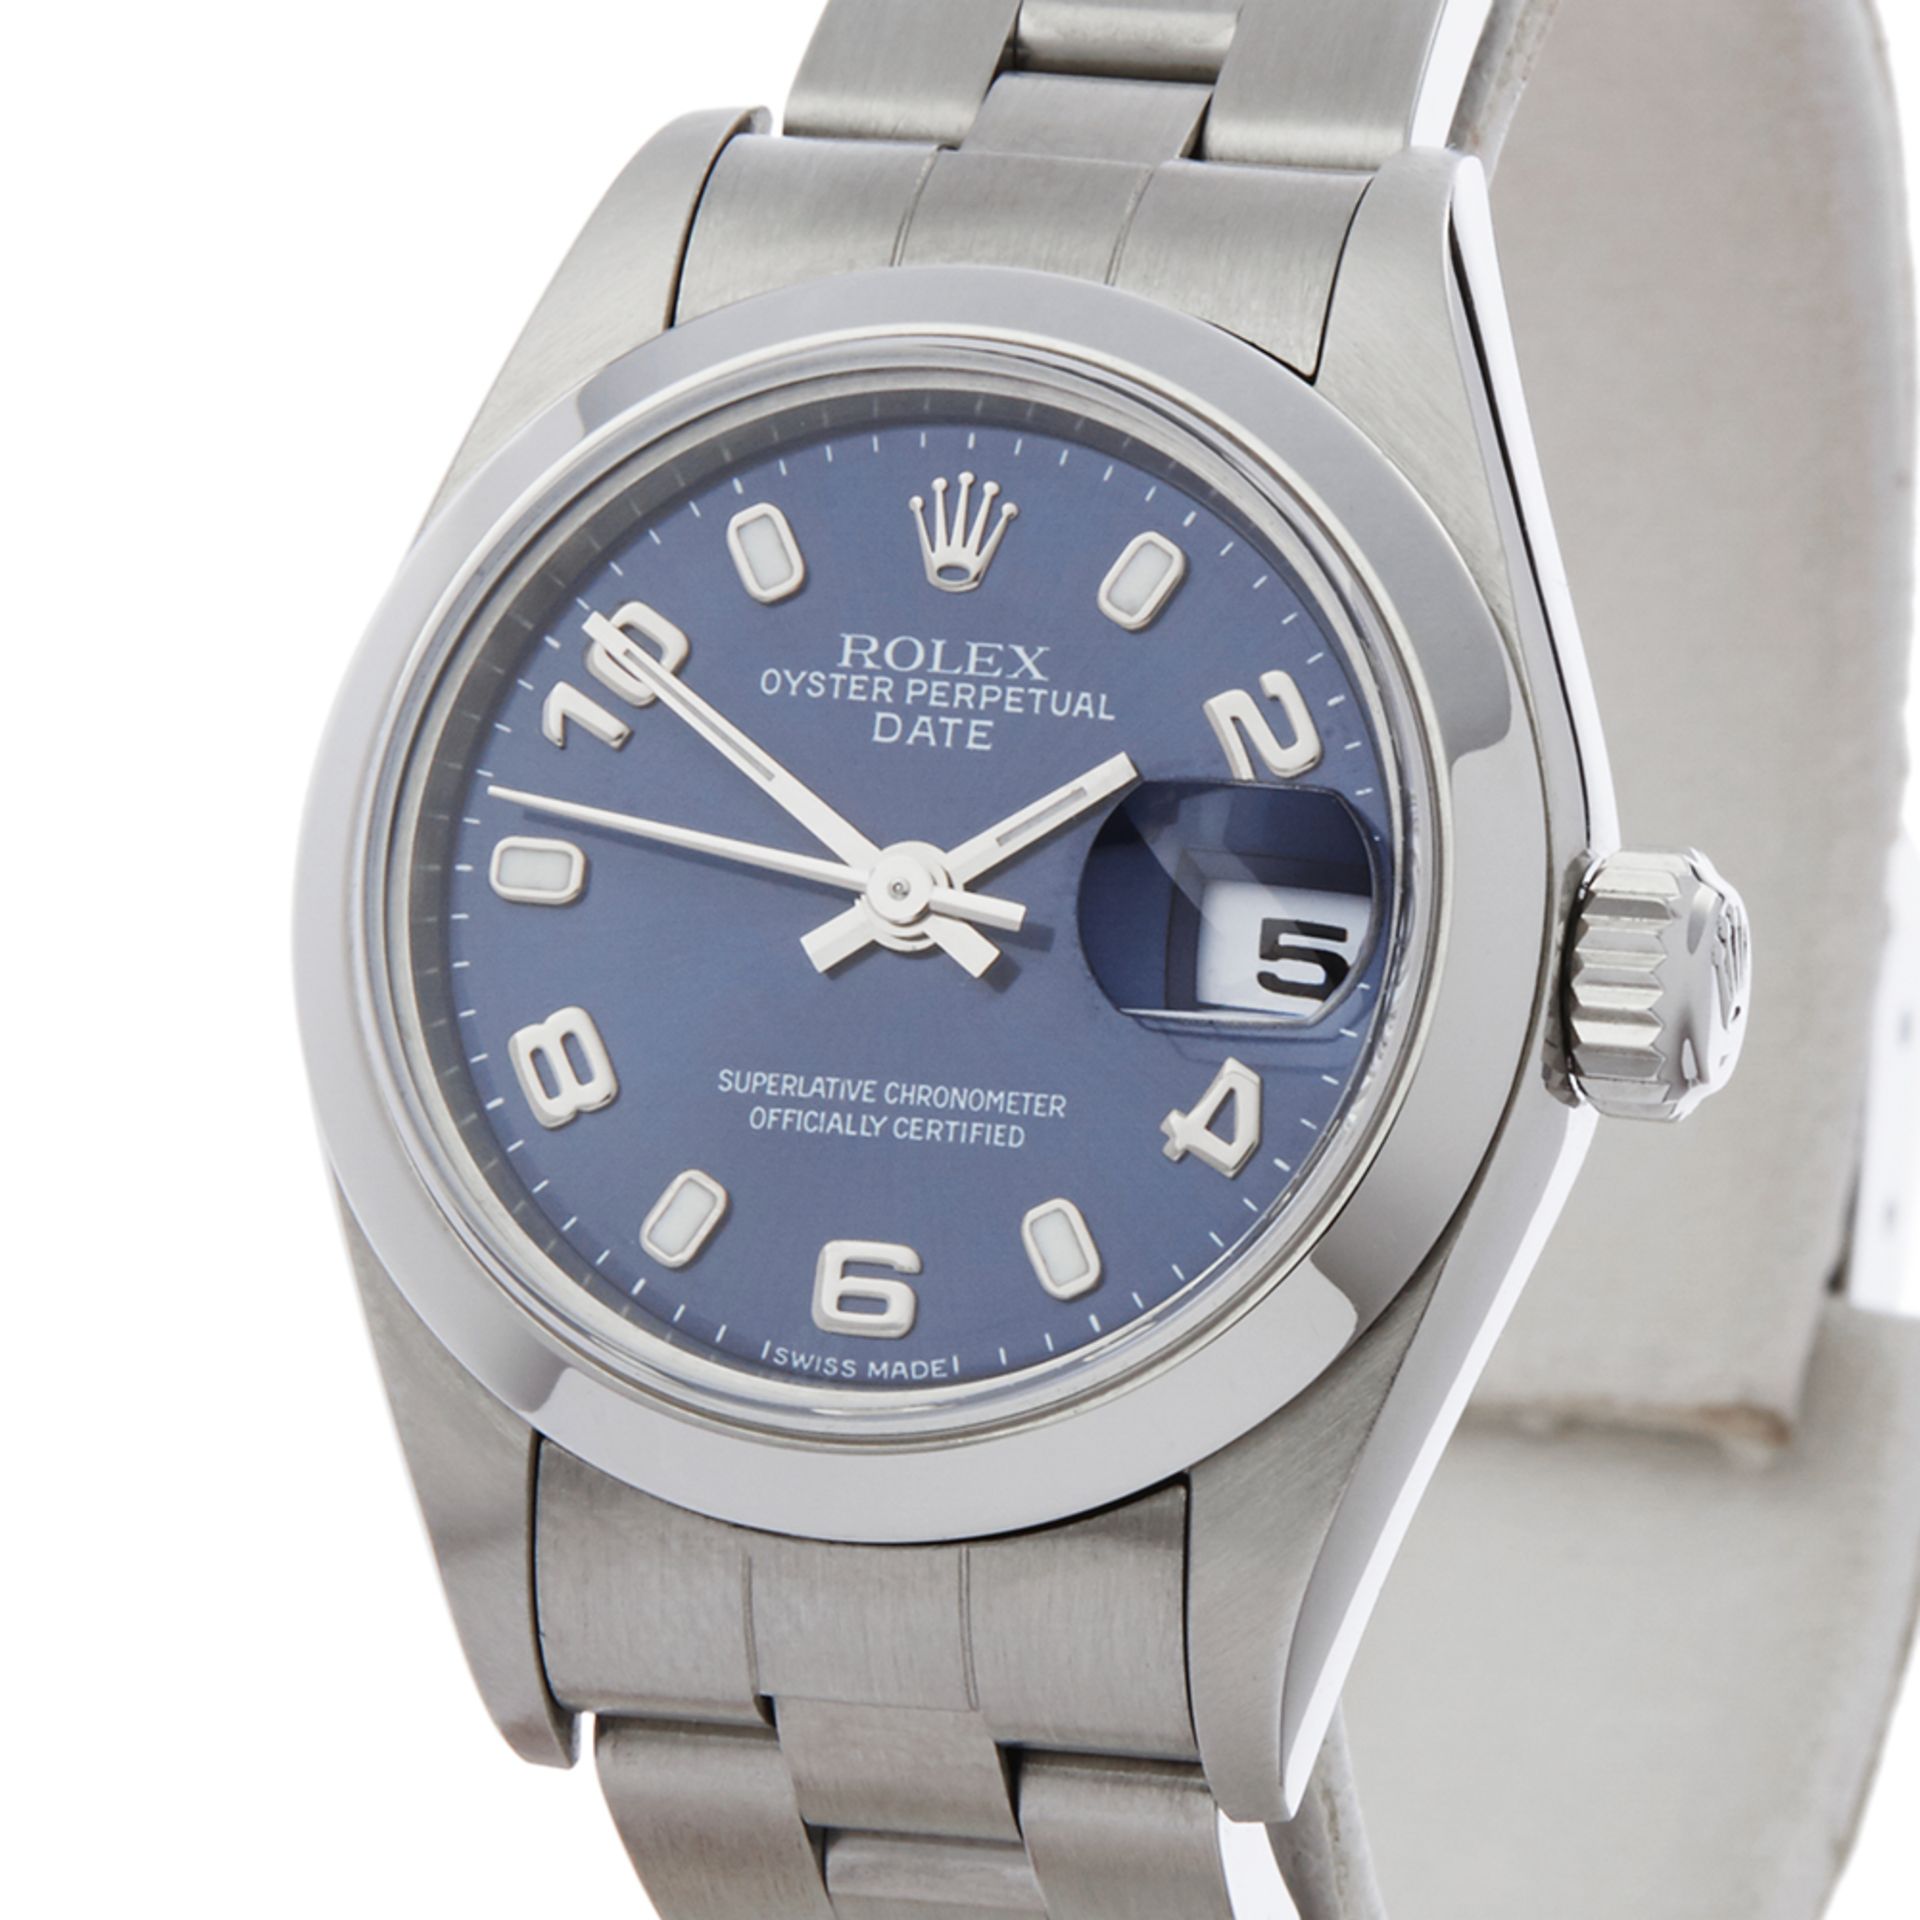 Rolex Datejust 28mm Stainless Steel - 79160 - Image 3 of 7